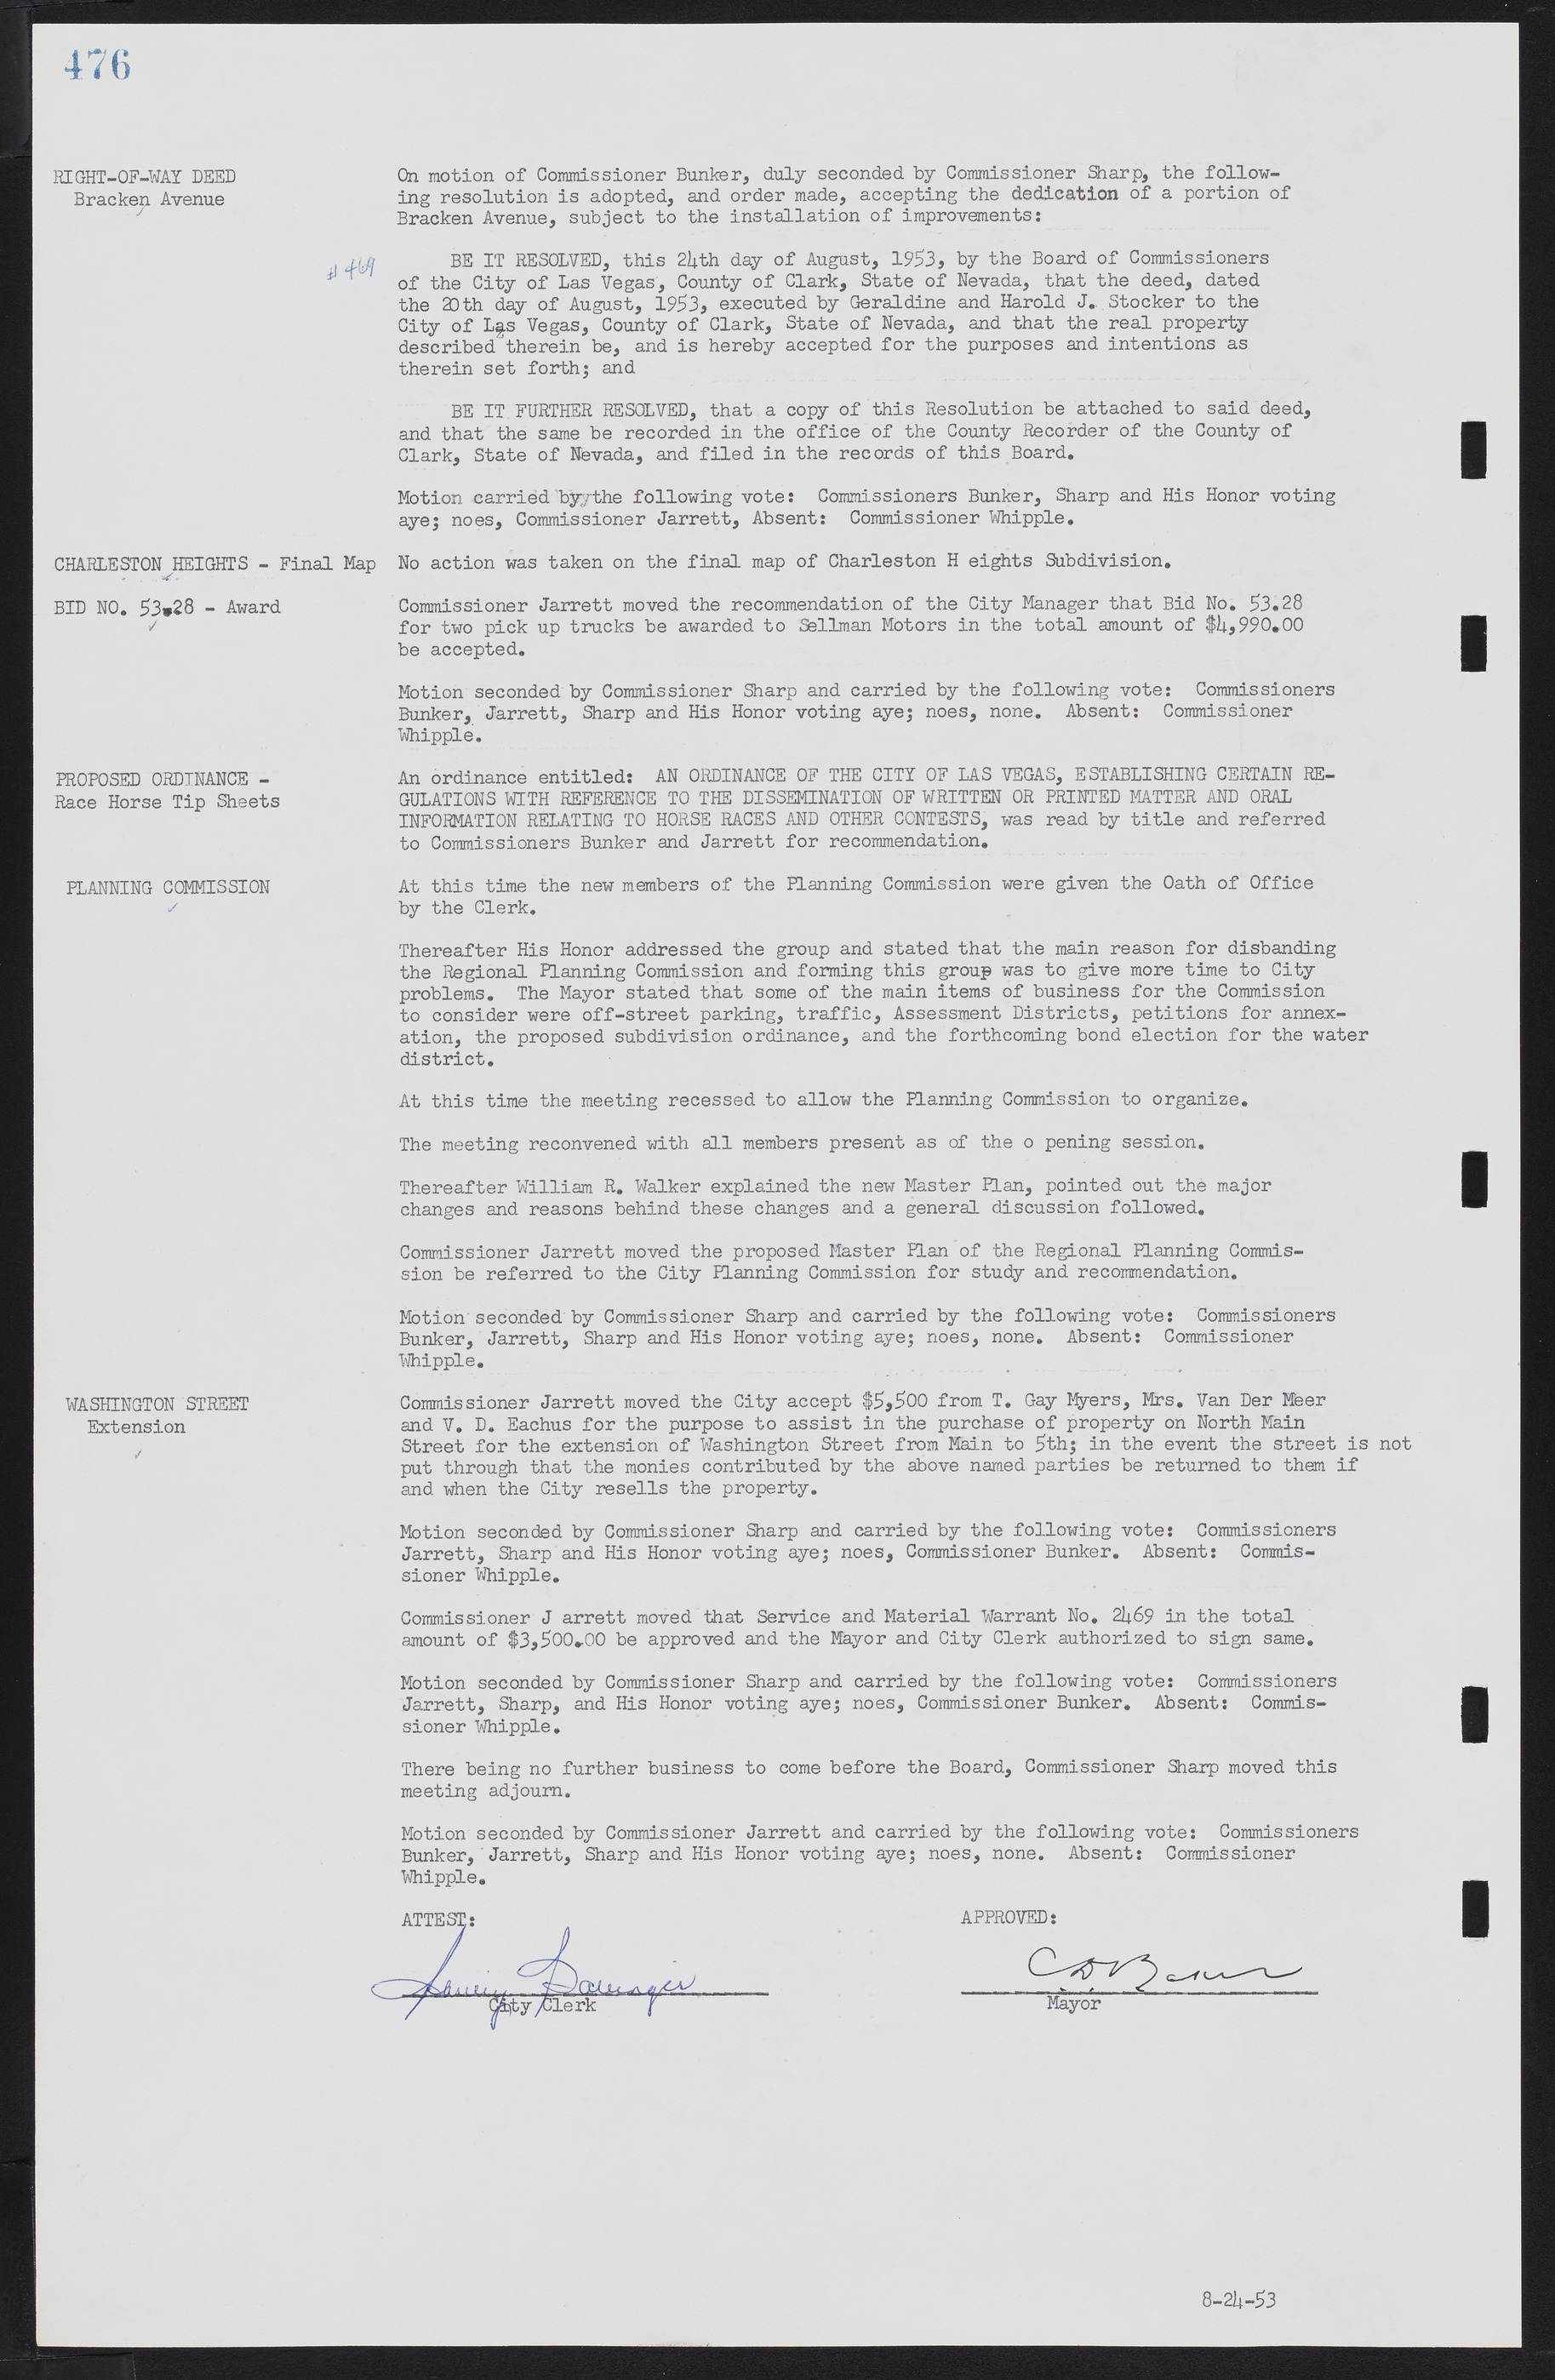 Las Vegas City Commission Minutes, May 26, 1952 to February 17, 1954, lvc000008-506